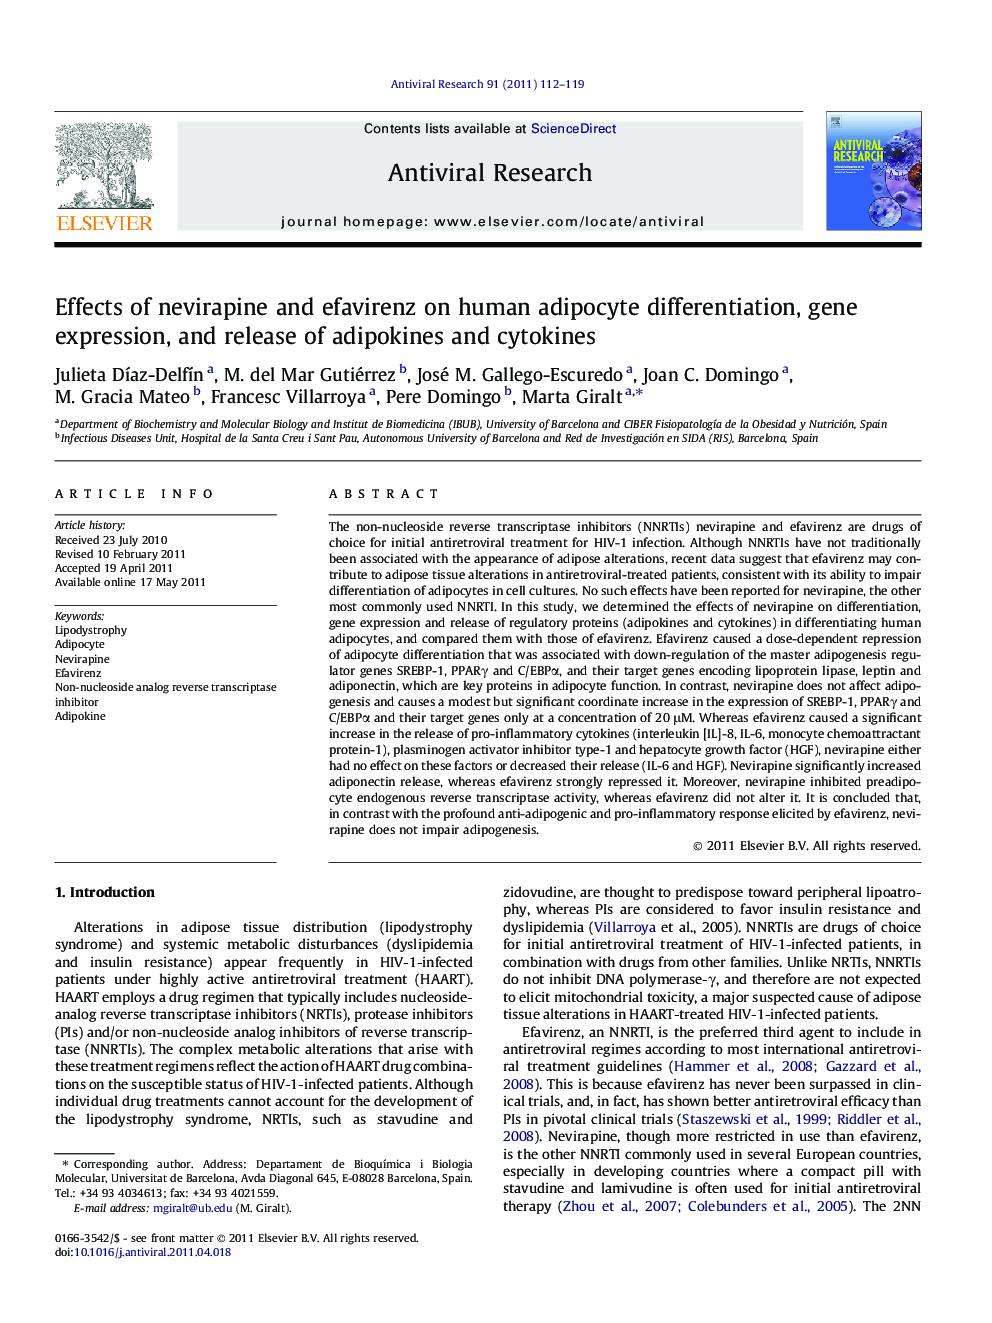 Effects of nevirapine and efavirenz on human adipocyte differentiation, gene expression, and release of adipokines and cytokines